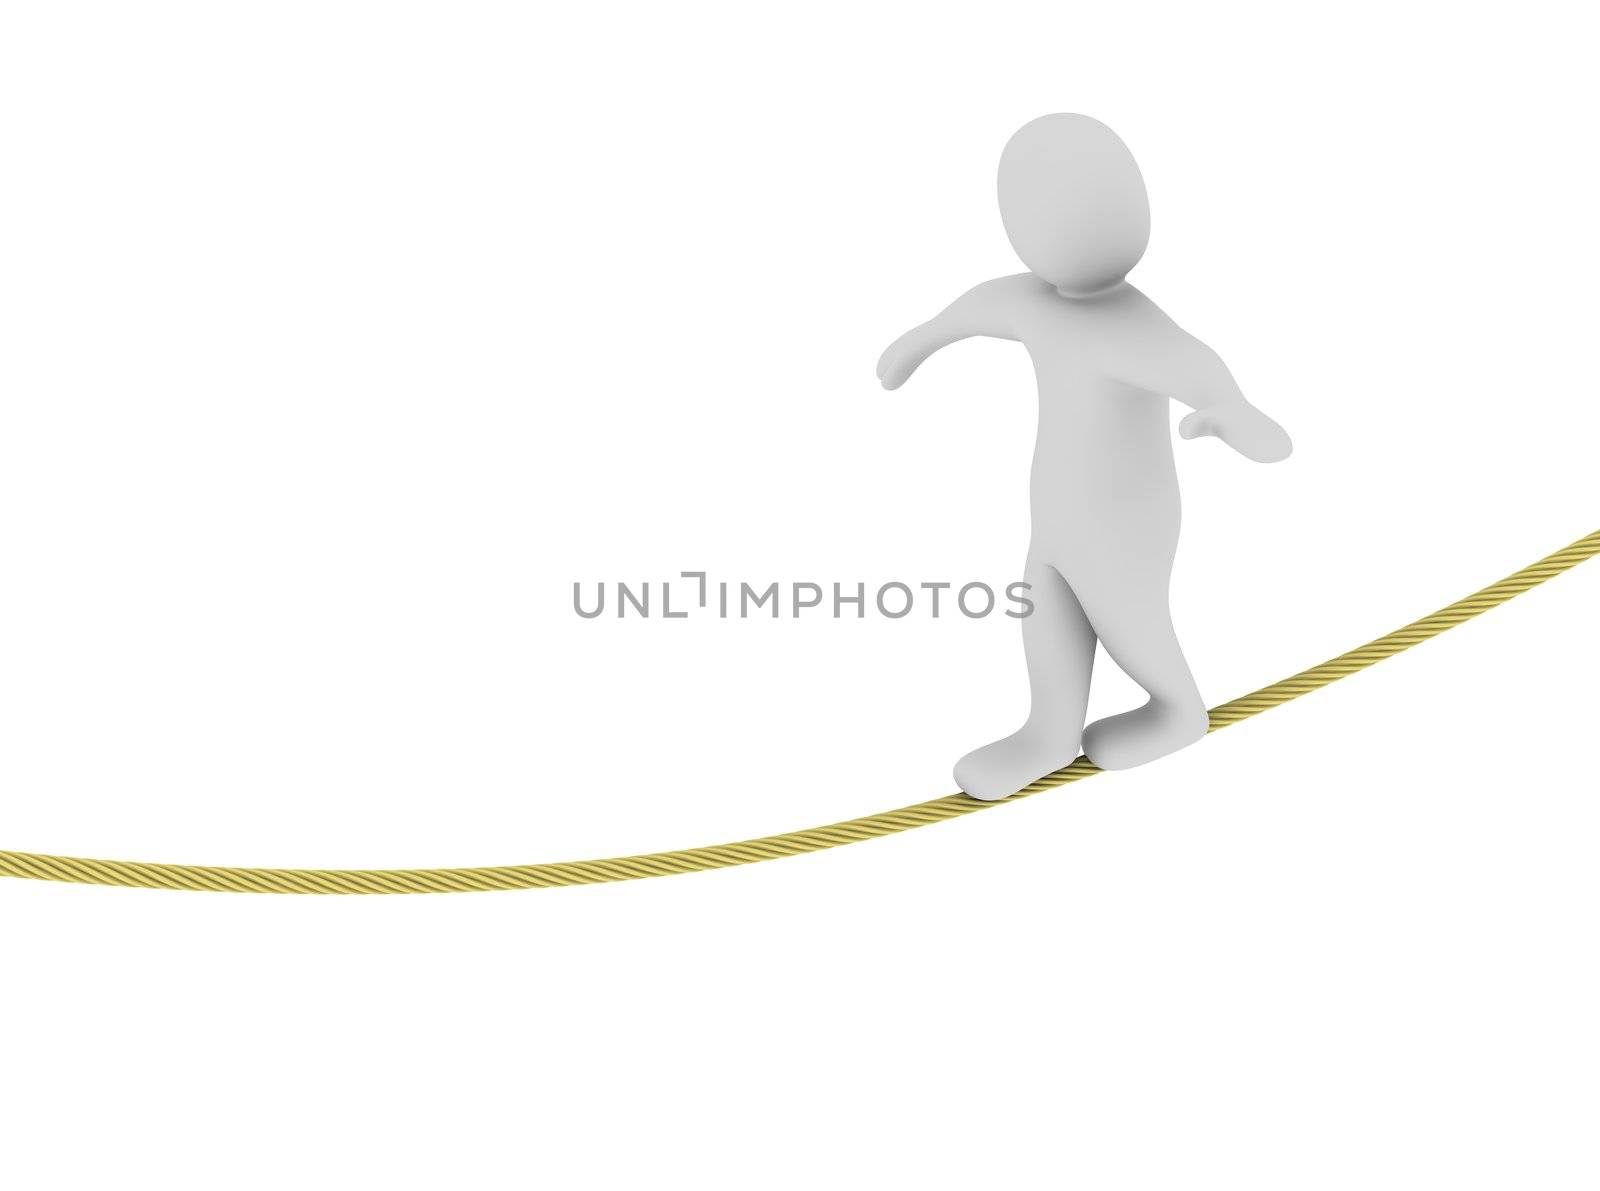 Man balancing on the rope. 3d rendered illustration.